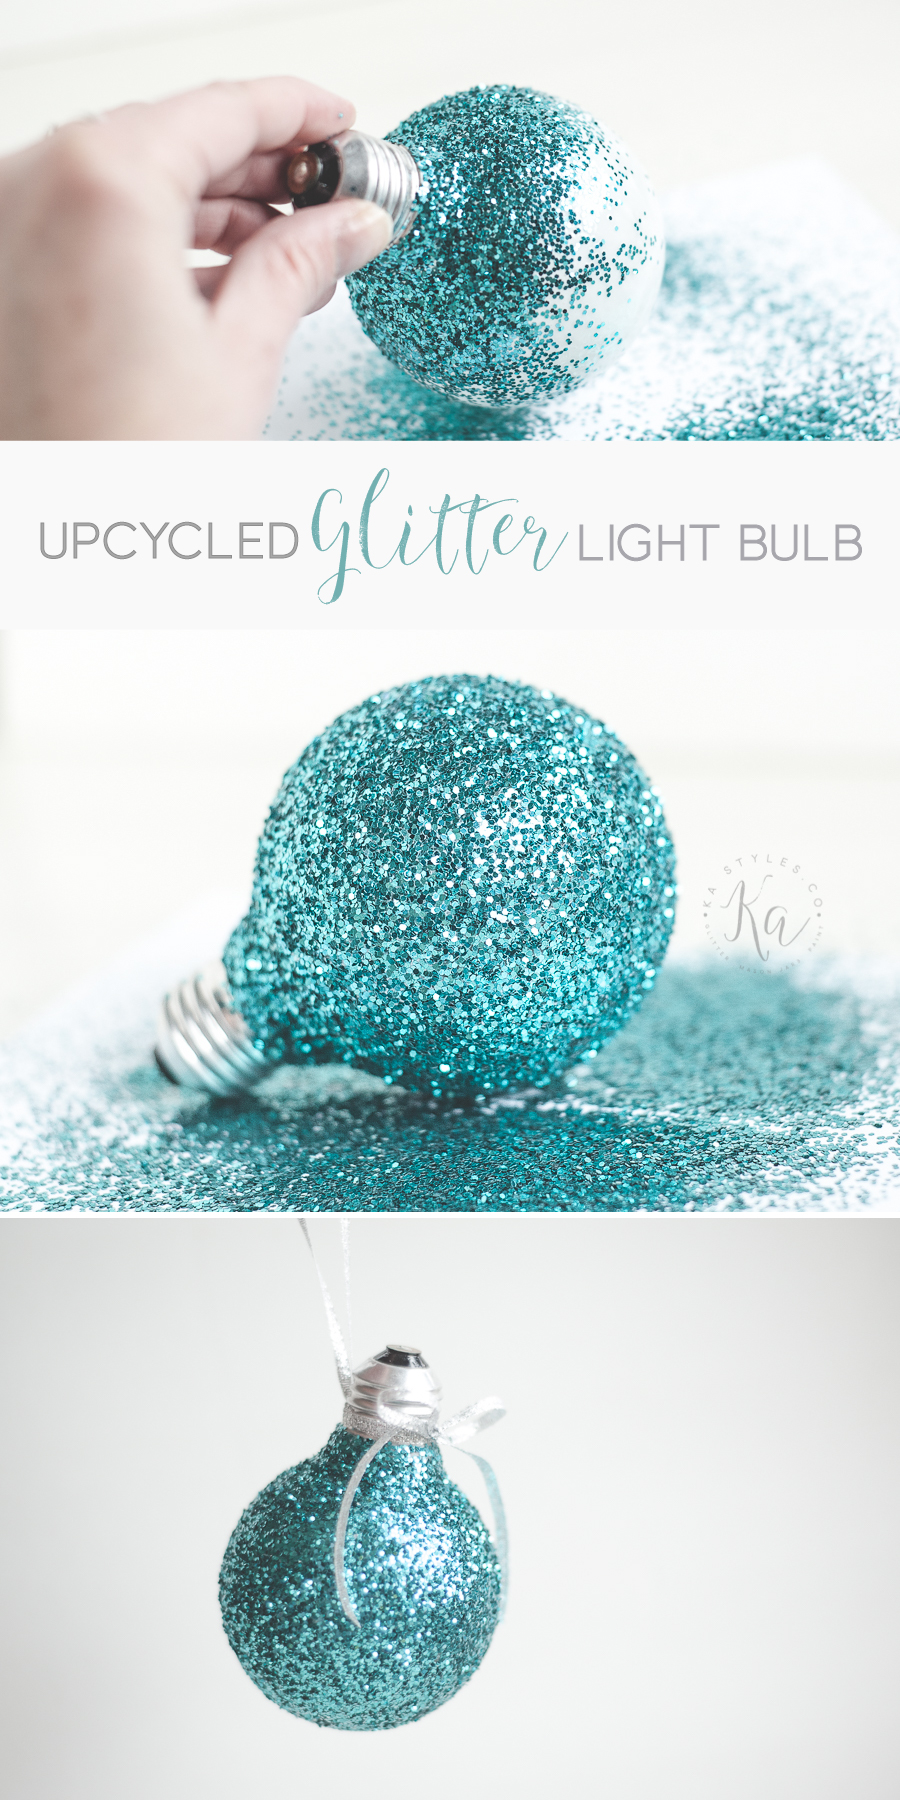 Upcycled glitter light bulb holiday ornament.